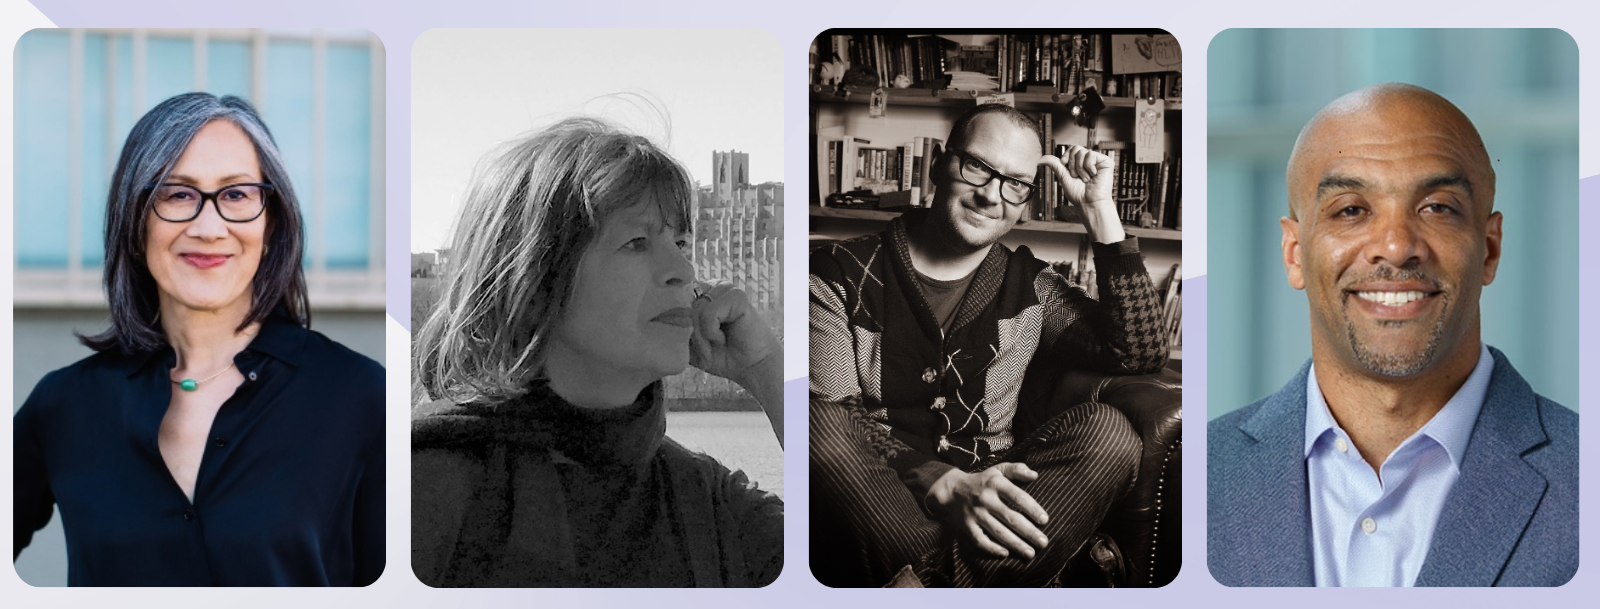 Kathryn Ma, Leslie Kirk Campbell, Cory Doctorow and Chad L. Williams